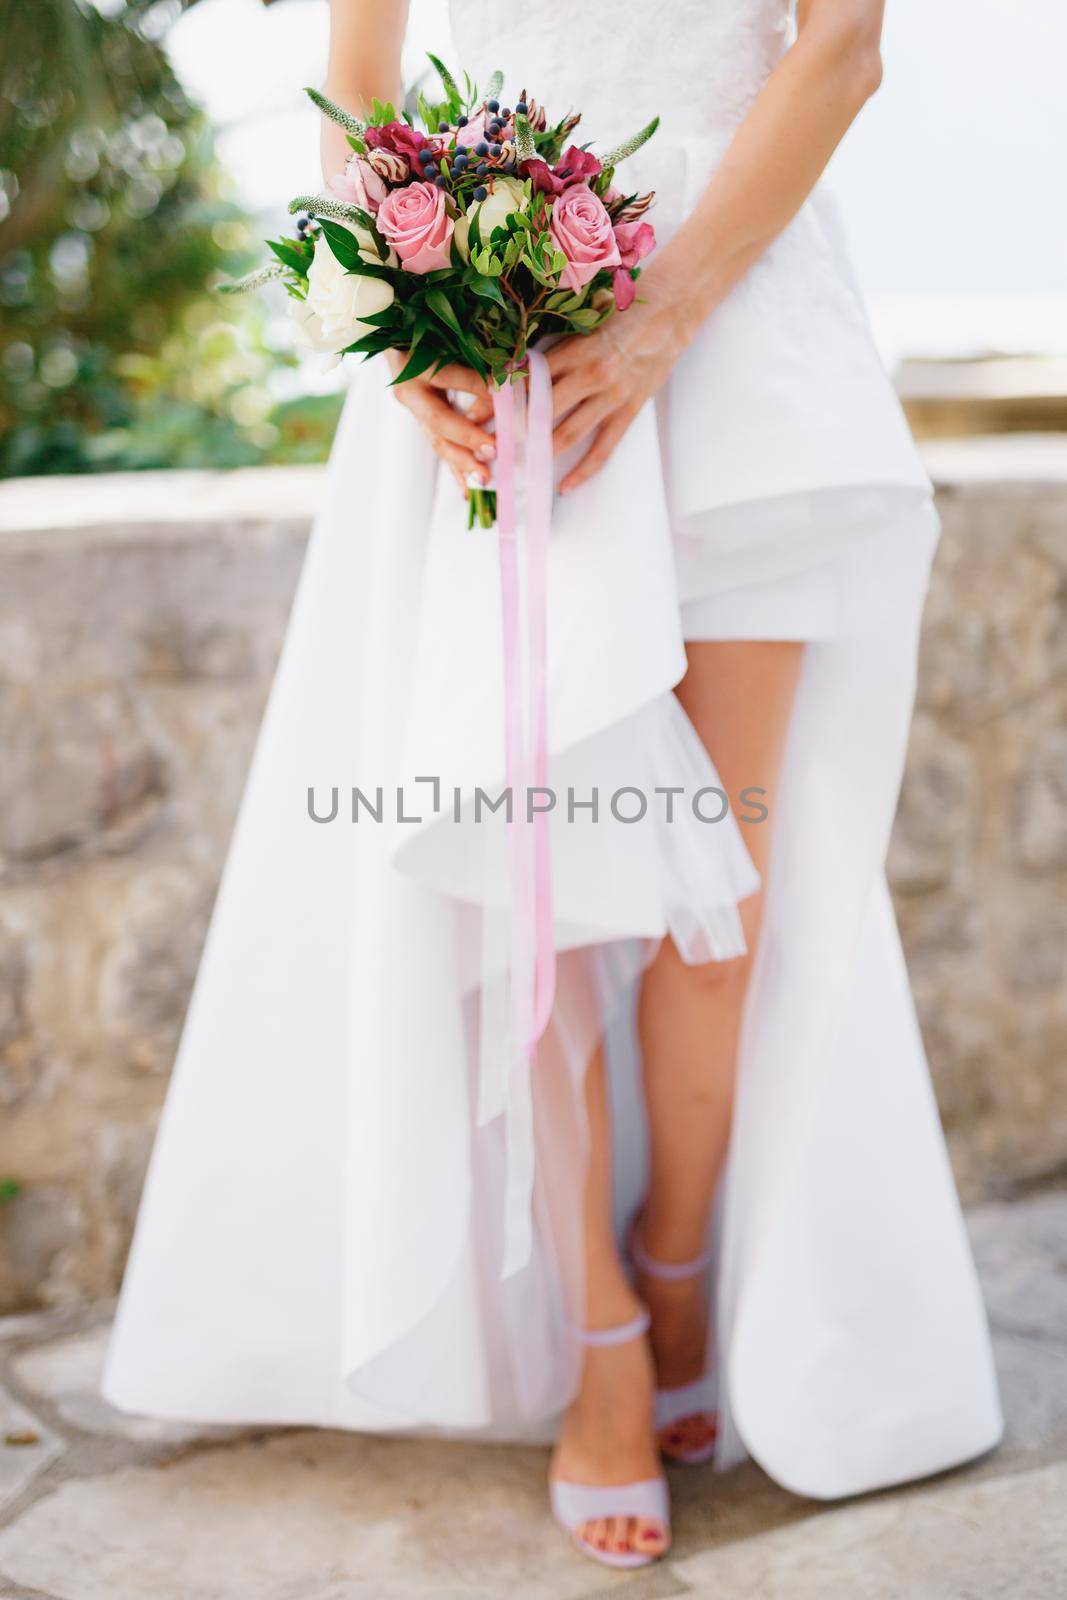 Bride in a stylish dress with open legs holding a wedding bouquet with roses, veronica, viburnum and boxwood in her hands, close-up by Nadtochiy